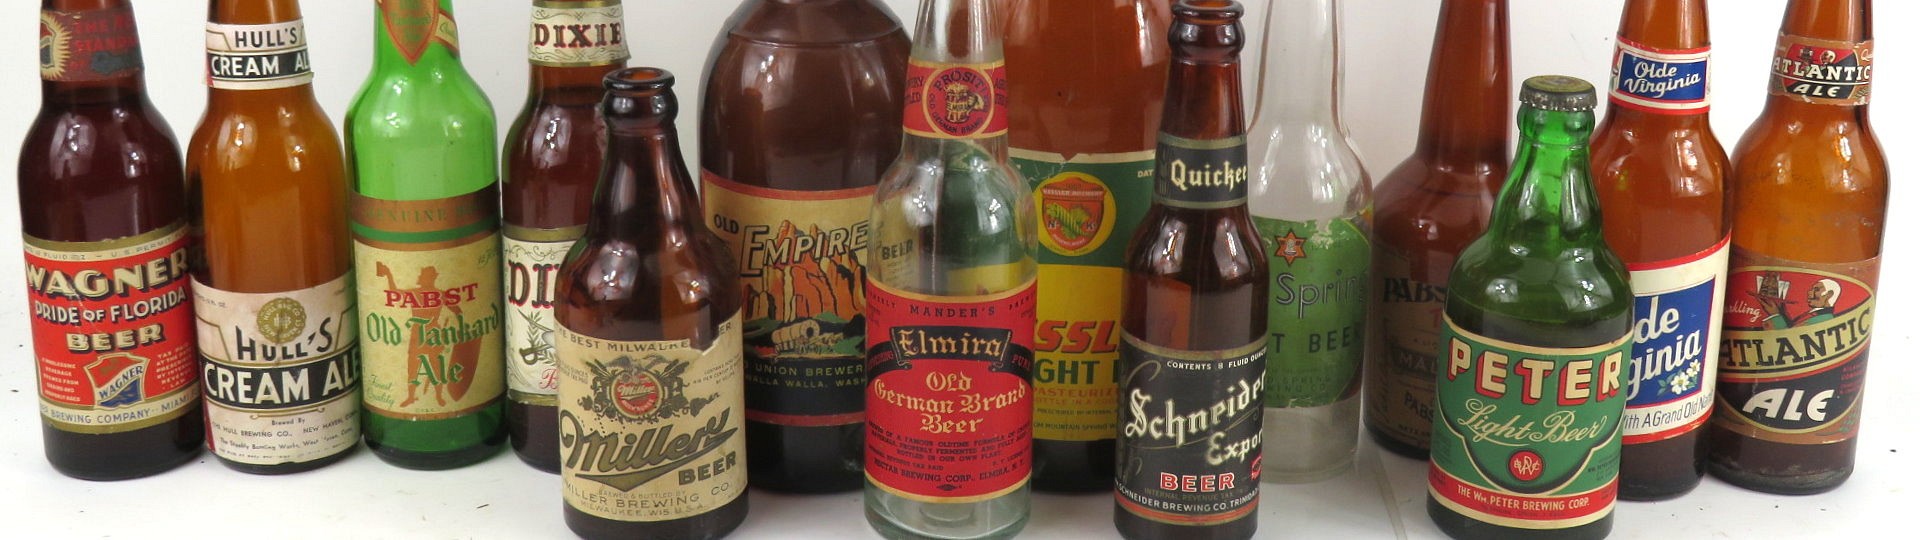 TavernTrove's "Two-Nights in March" Vintage Beer Bottle Auction (Day 1) by TavernTrove